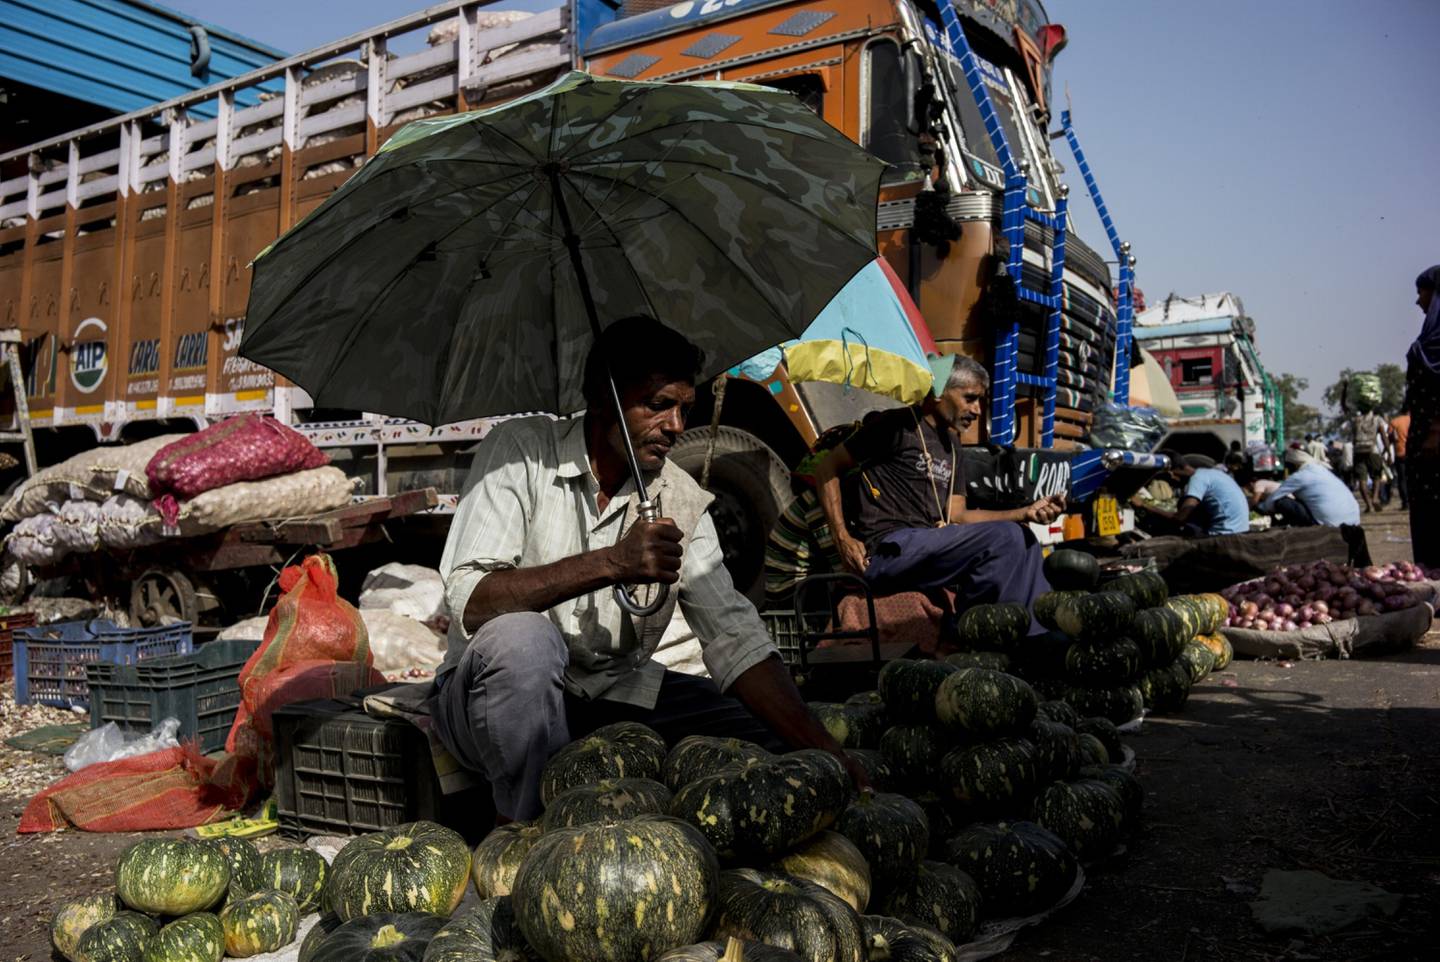 Retail inflation in India stood at 7.04 per cent in May, above the central bank’s upper threshold of 6 per cent. Bloomberg